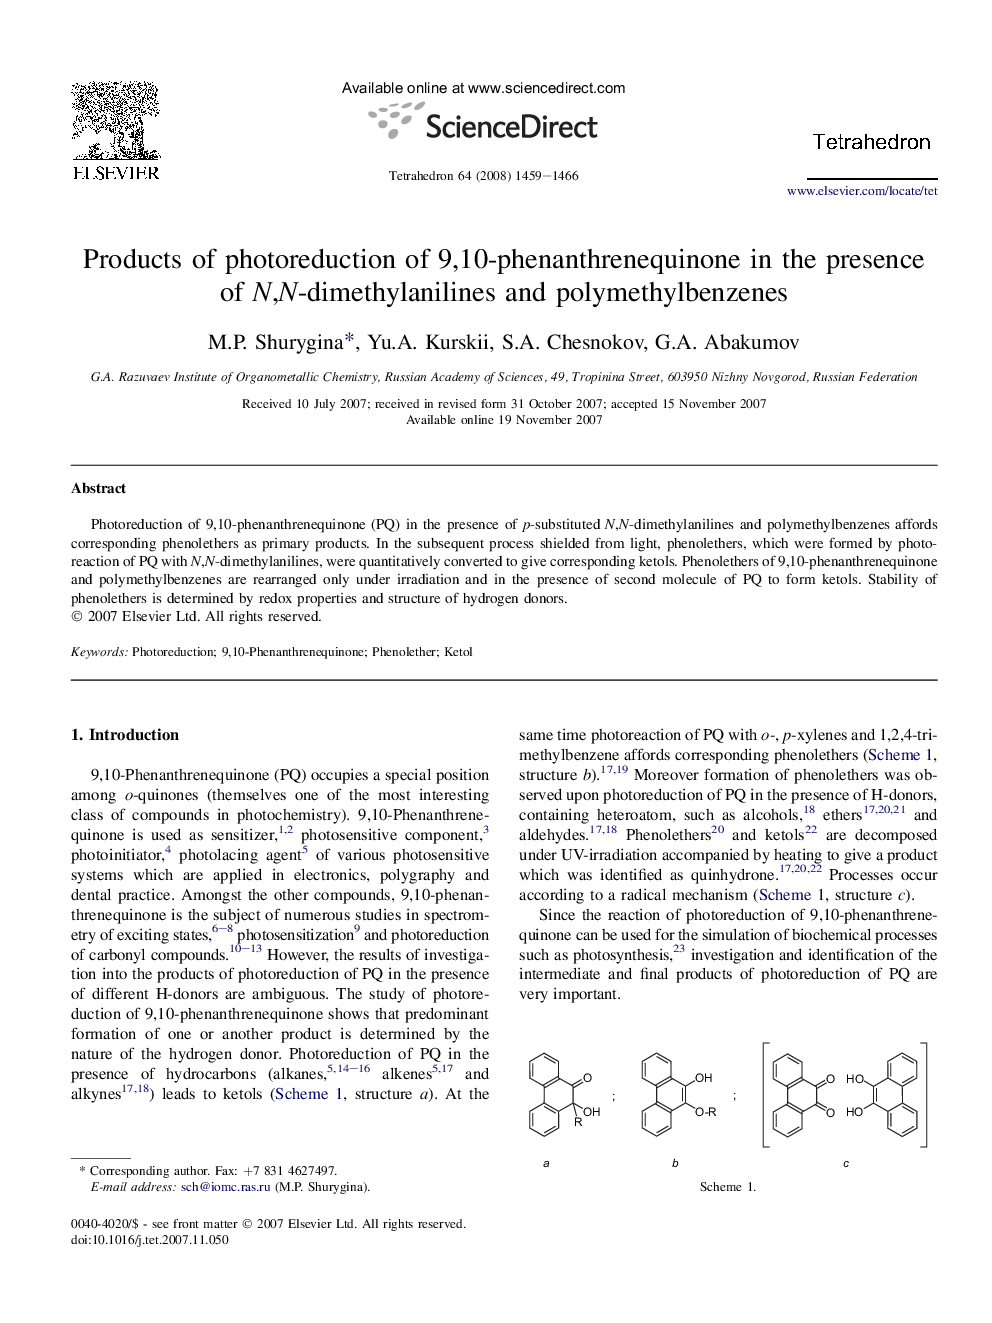 Products of photoreduction of 9,10-phenanthrenequinone in the presence of N,N-dimethylanilines and polymethylbenzenes